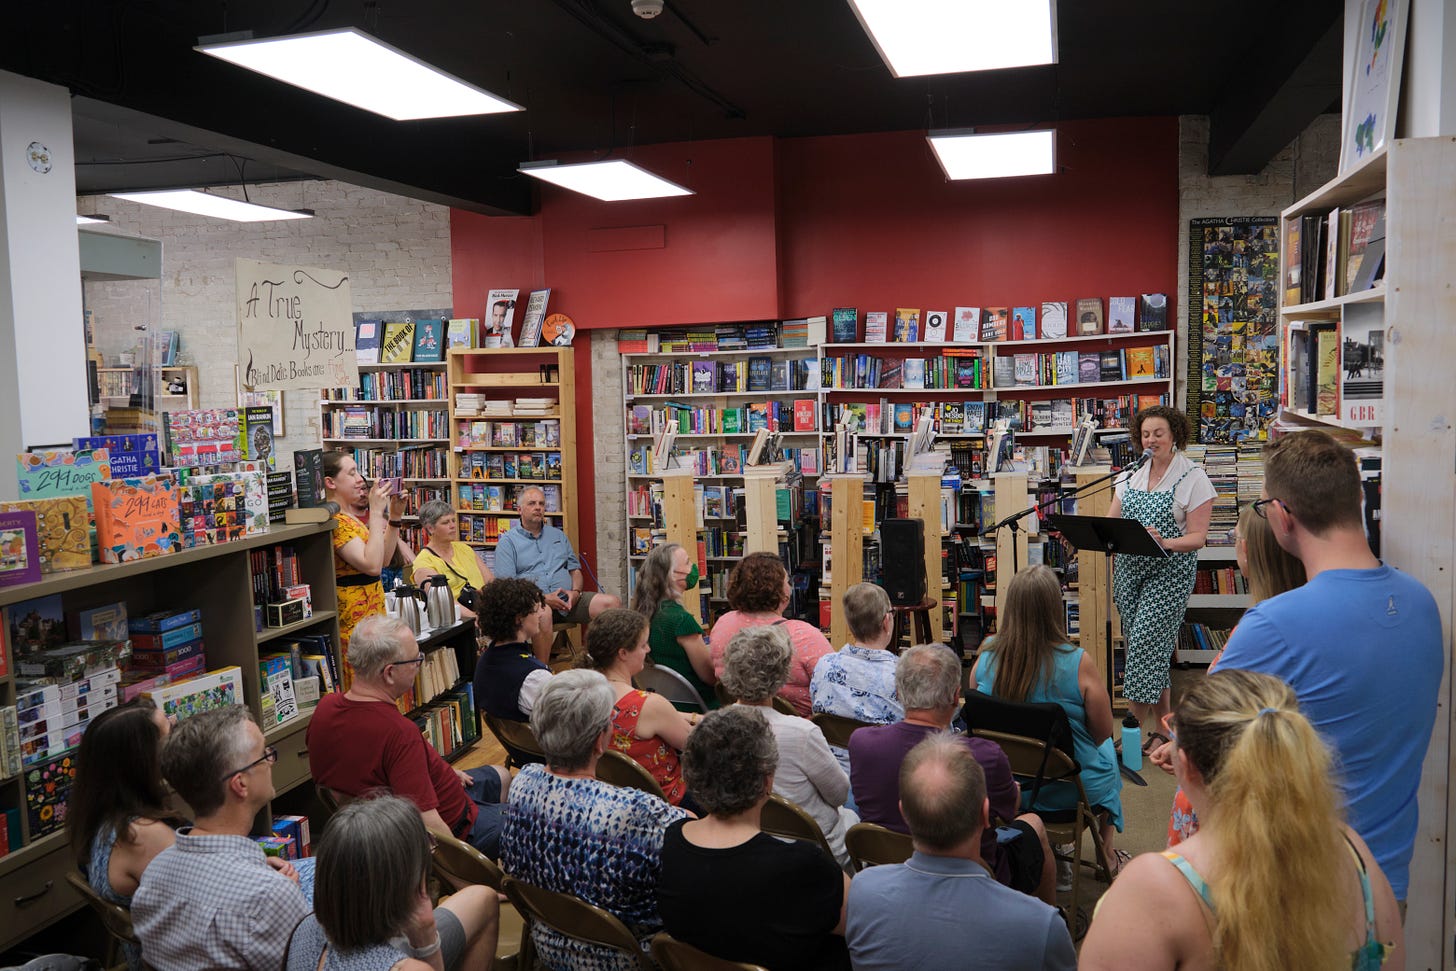 A bunch of people gathered in a bookstore in the cozy space between lots of book and shelves, an author reading her book at the front!